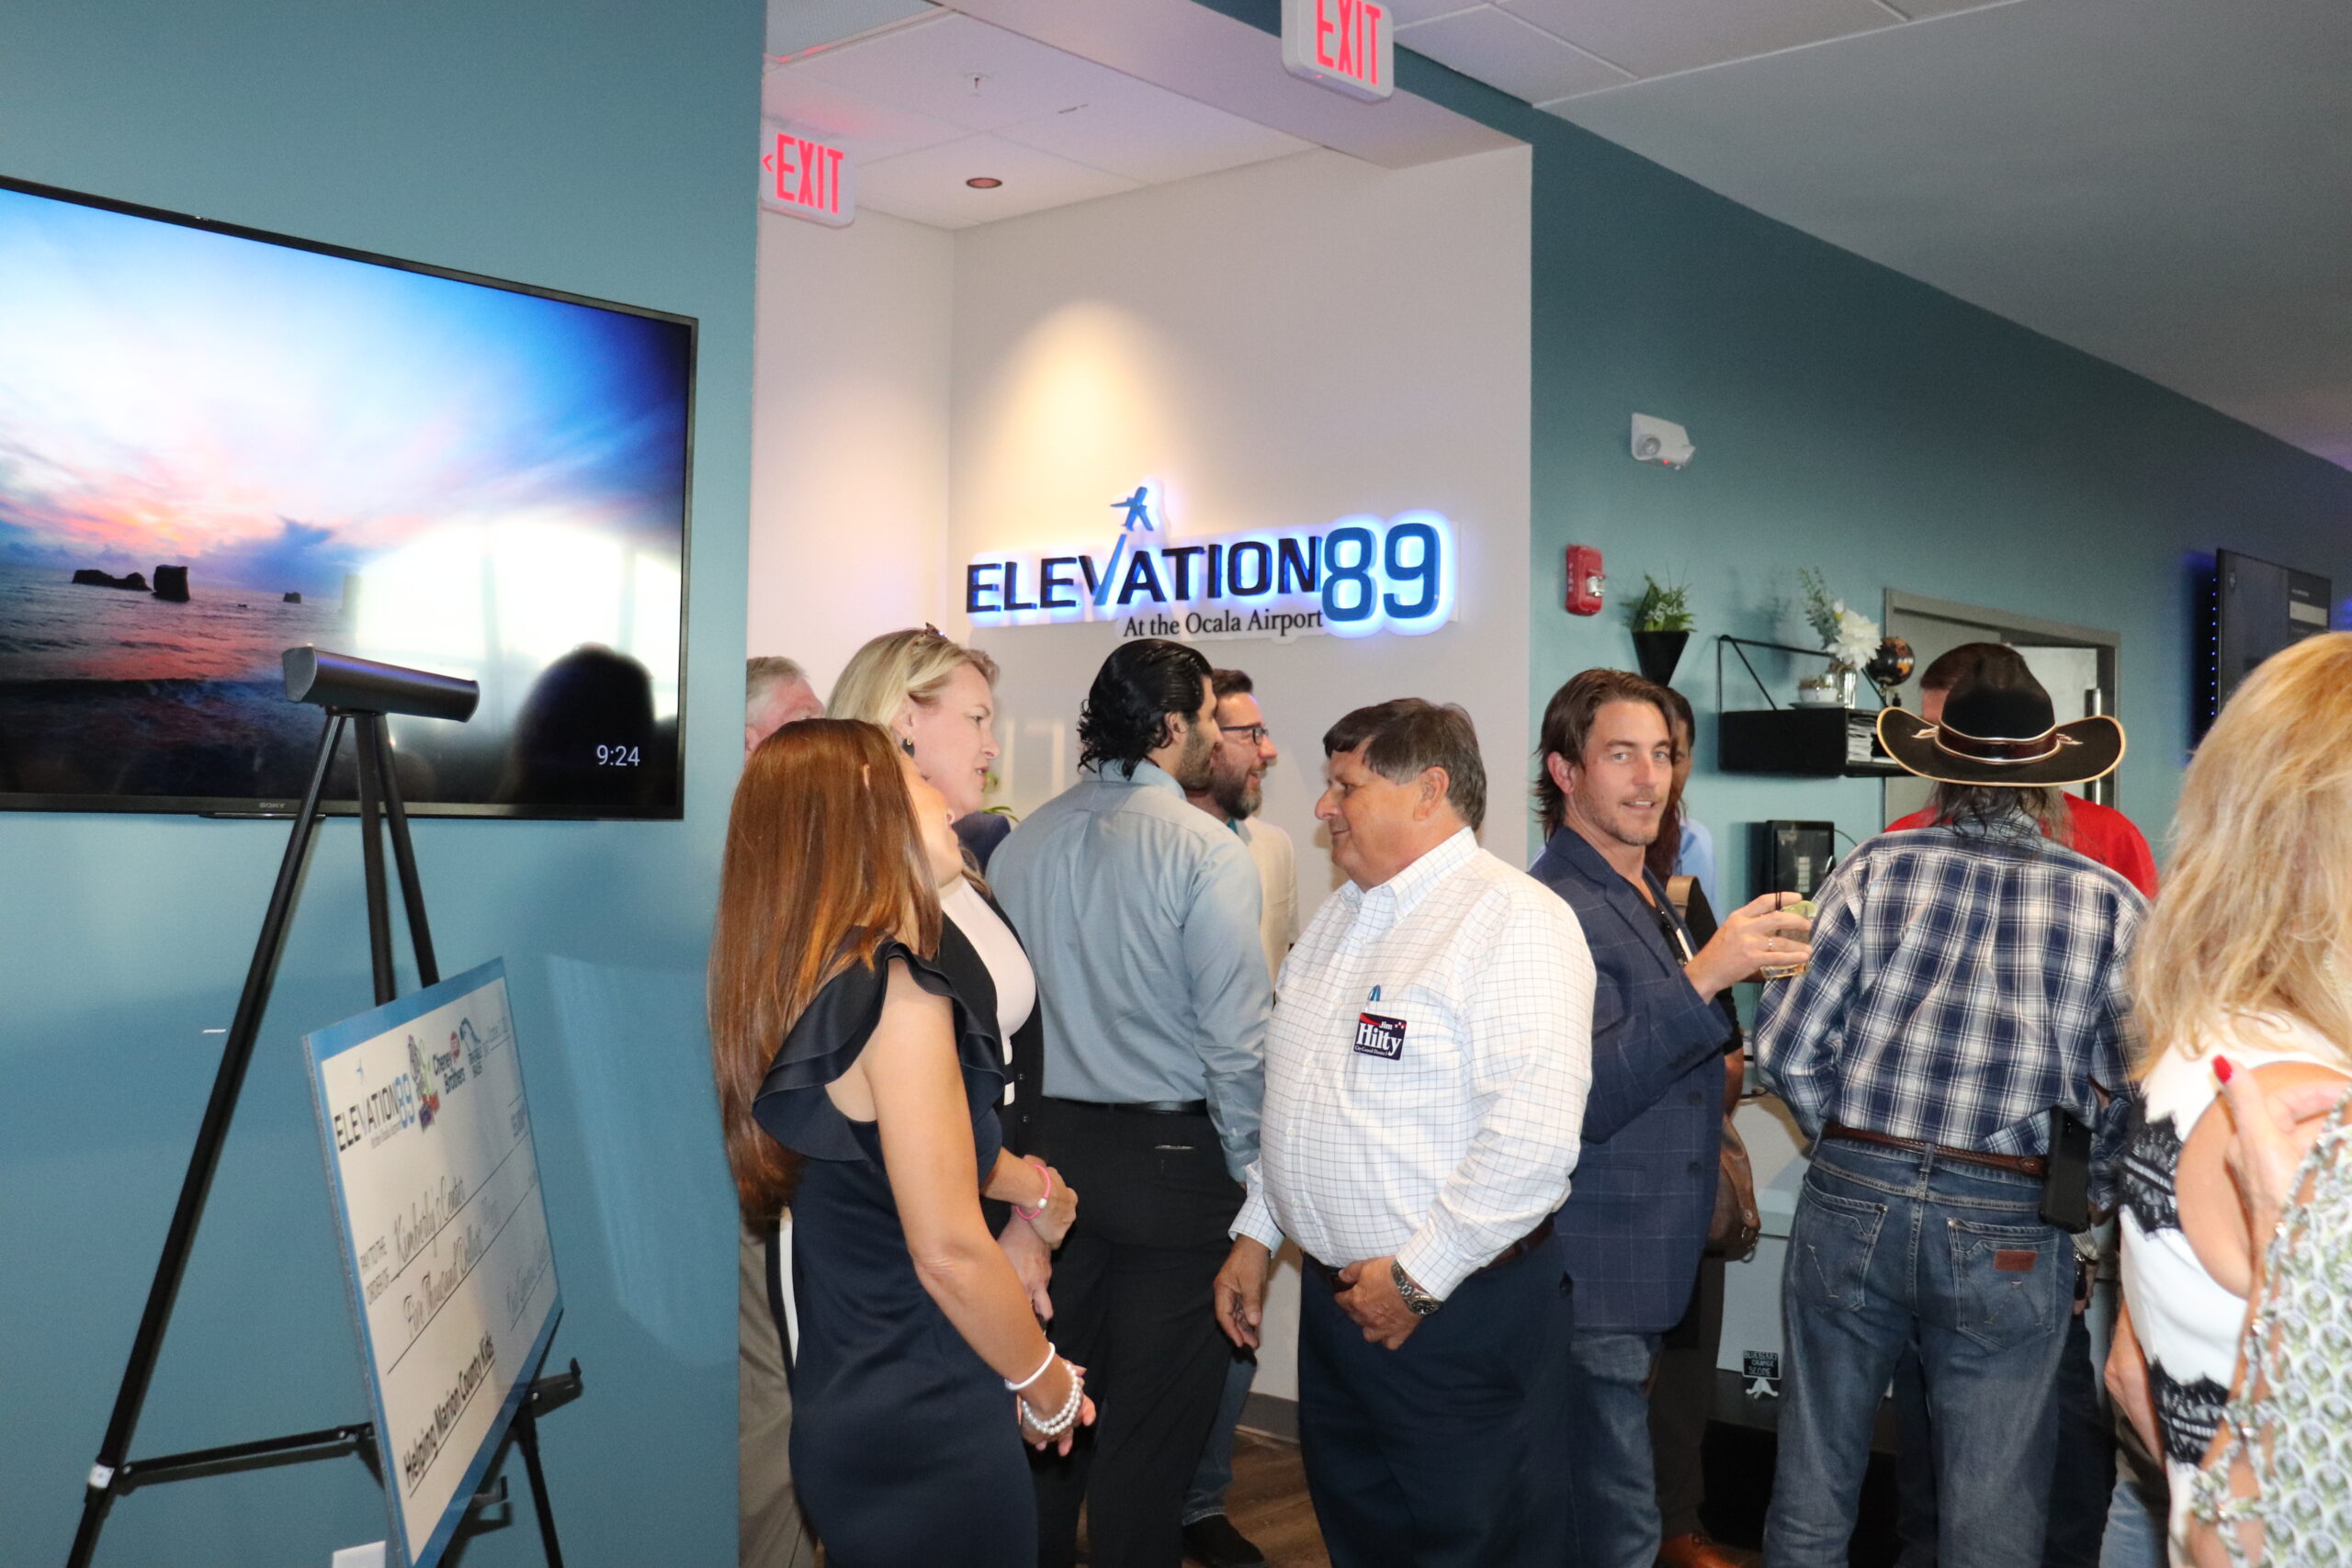 Event attendees at the Elevation 89 Grand Opening